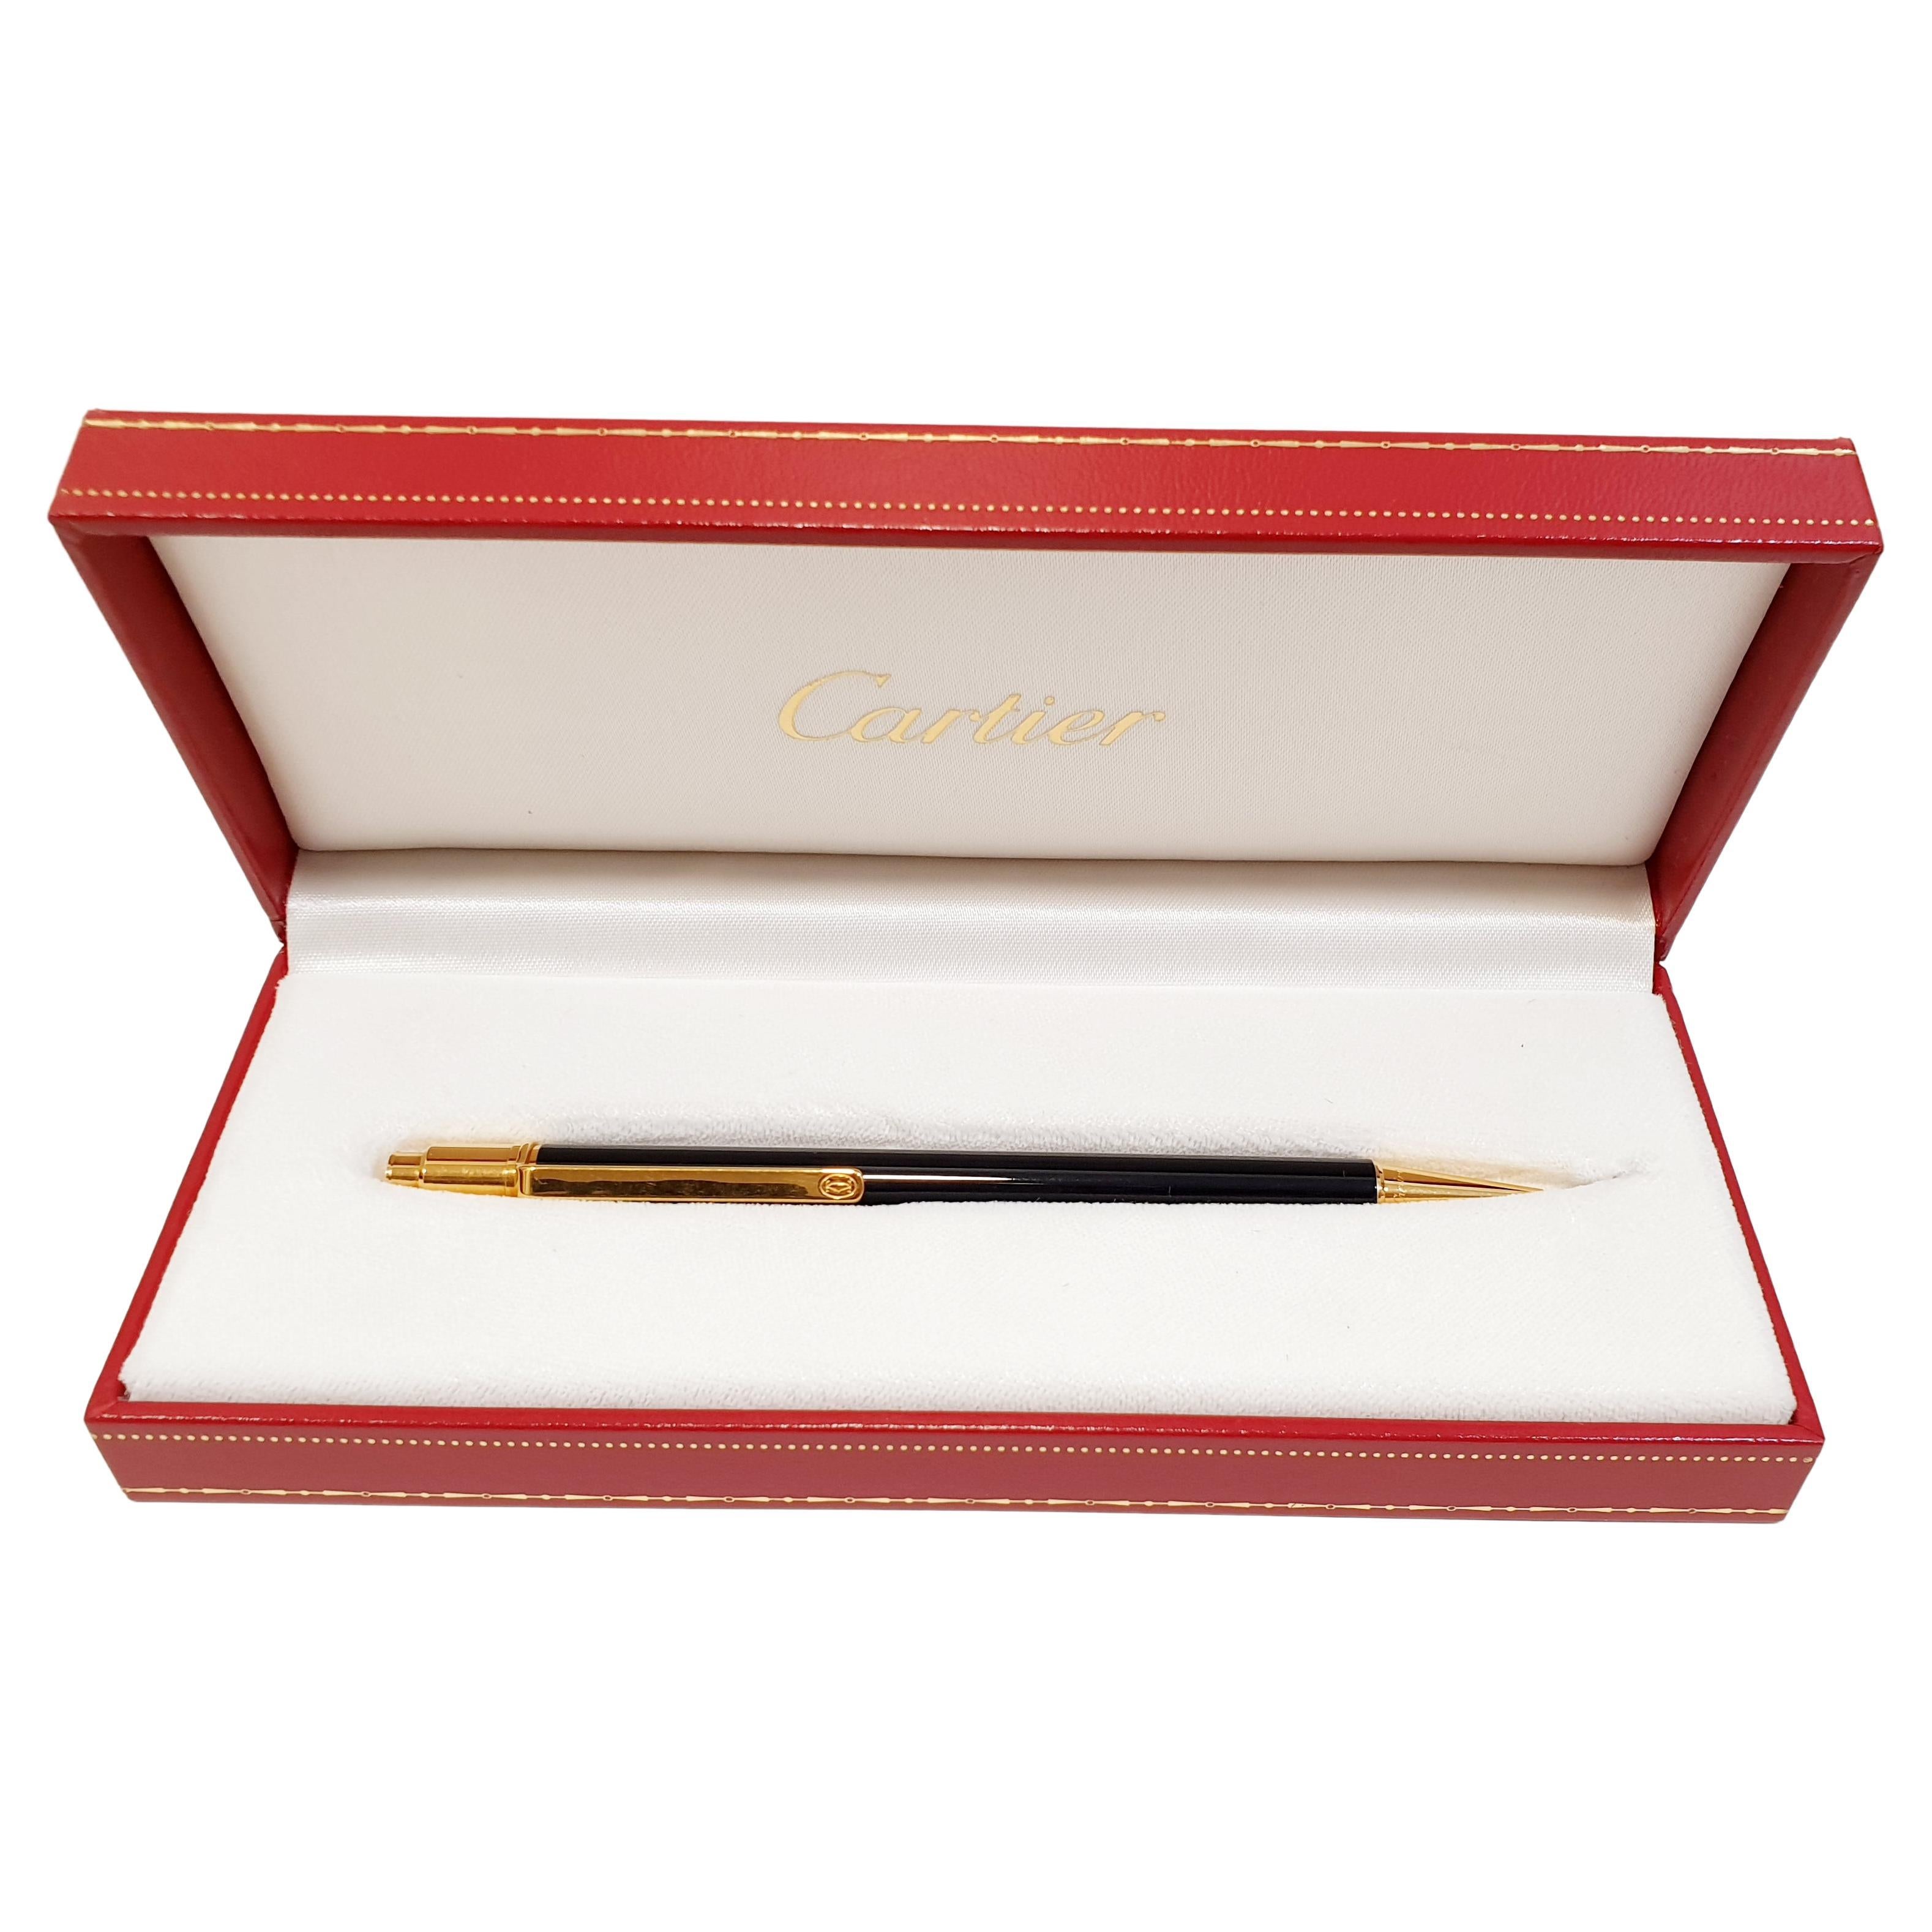 Le Must de Cartier Gold-Plated Pencil with box and papers 